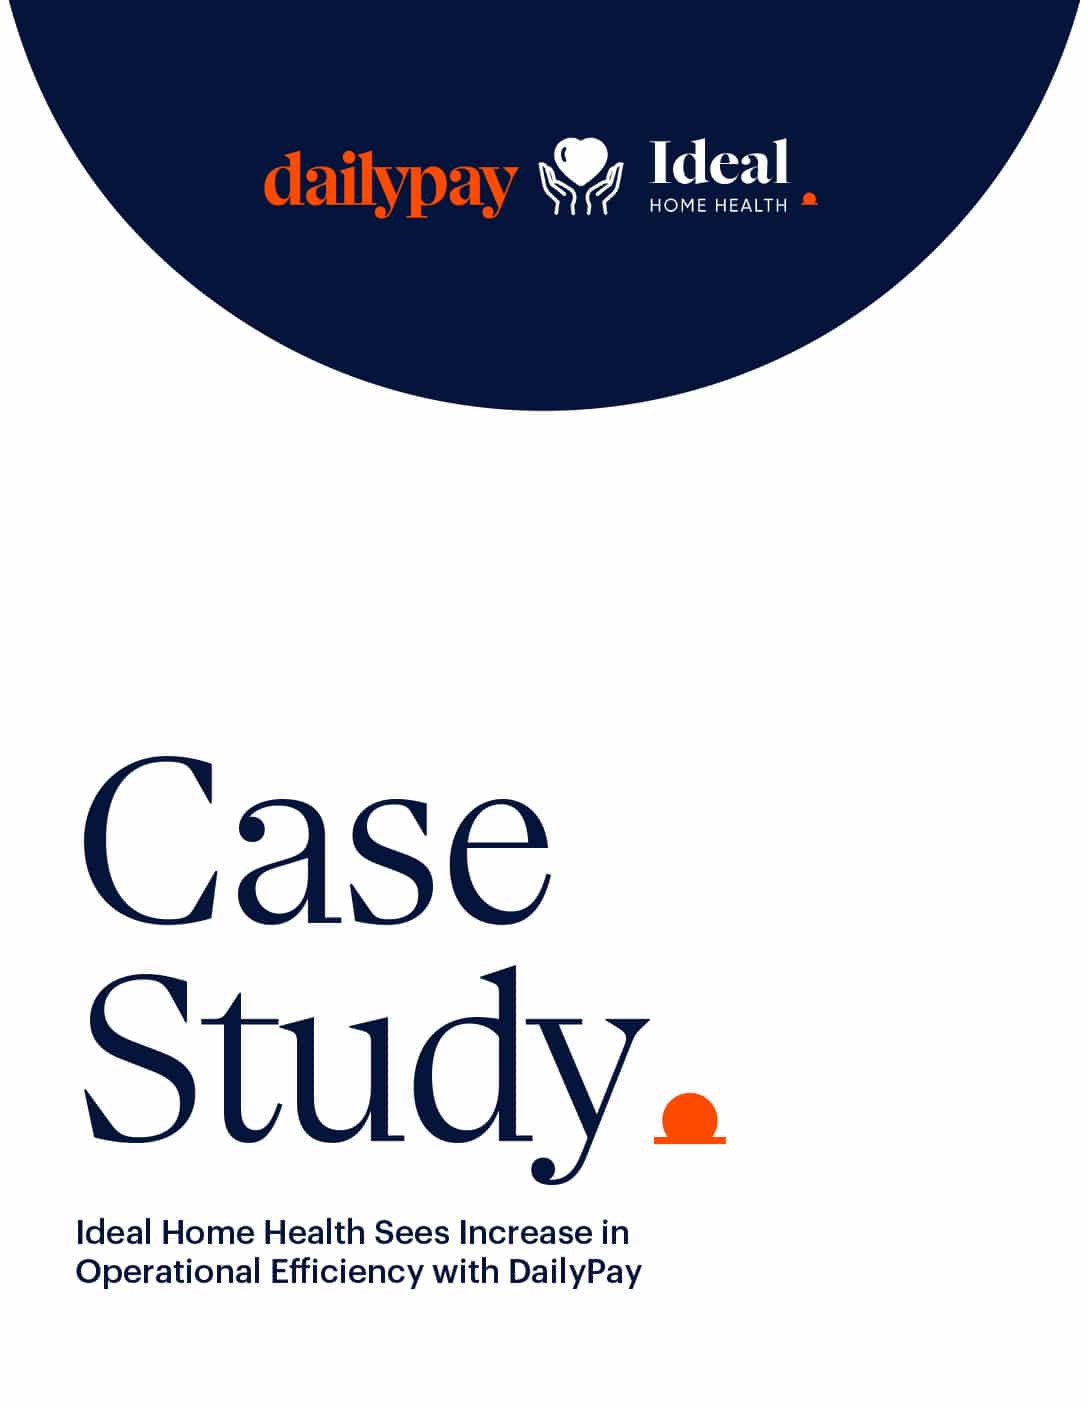 The image features the cover of a case study document. The top part shows two logos: "dailypay" in orange text with a small orange icon, and "Ideal Home Health" with a heart and two hands, all in white against a dark blue background. Below, the title reads "Case Study: Ideal Home Health Sees Increase in Operational Efficiency with DailyPay.